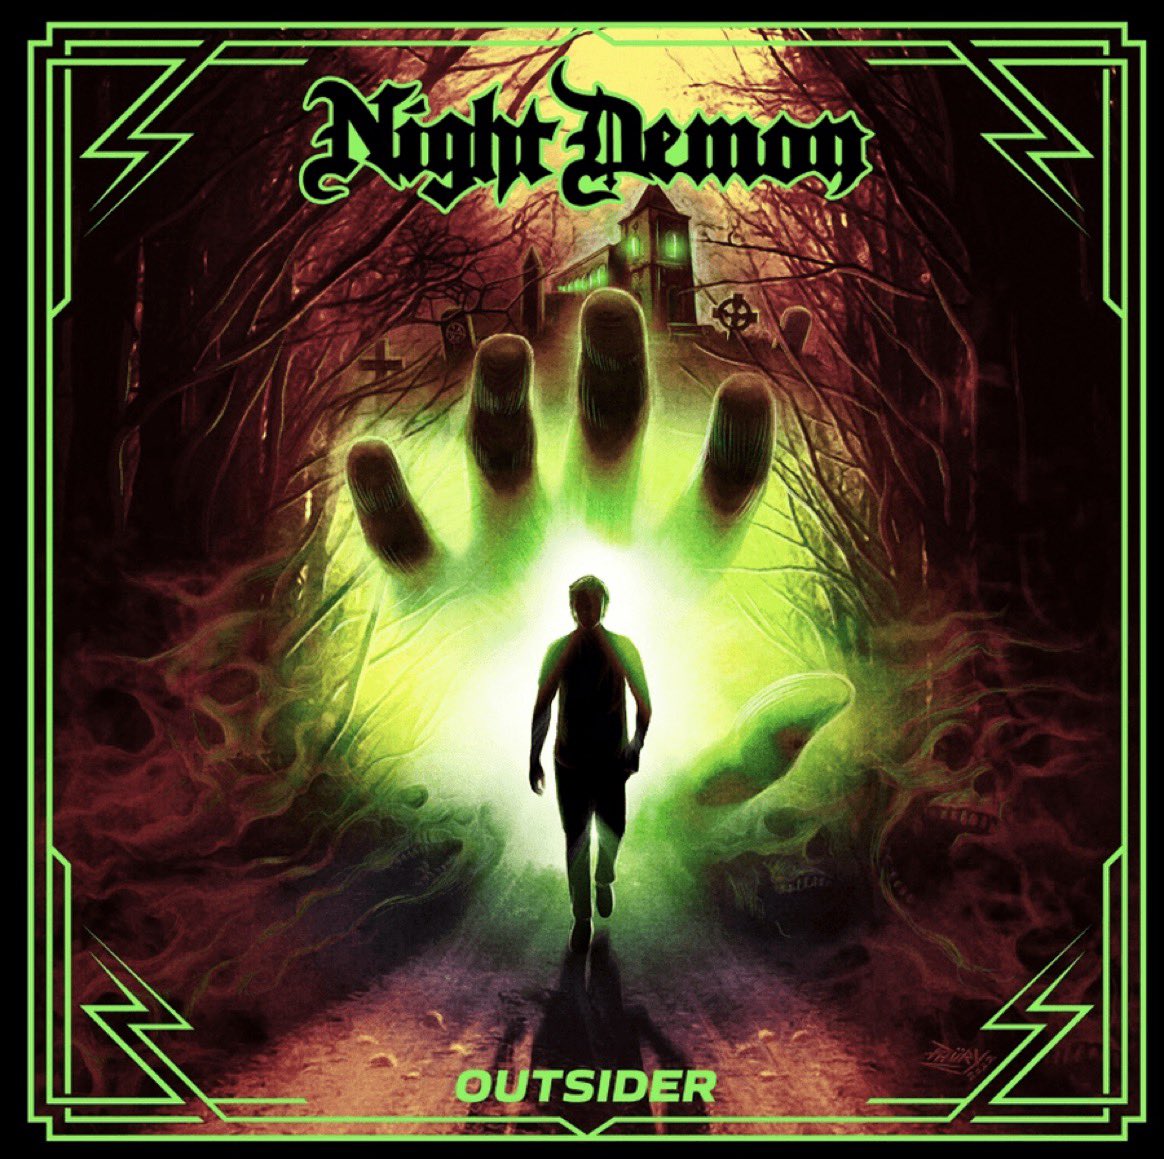 The new Night Demon is a serious good time!
youtu.be/r-BVtOI6RxM
#NightDemon #NowPlaying